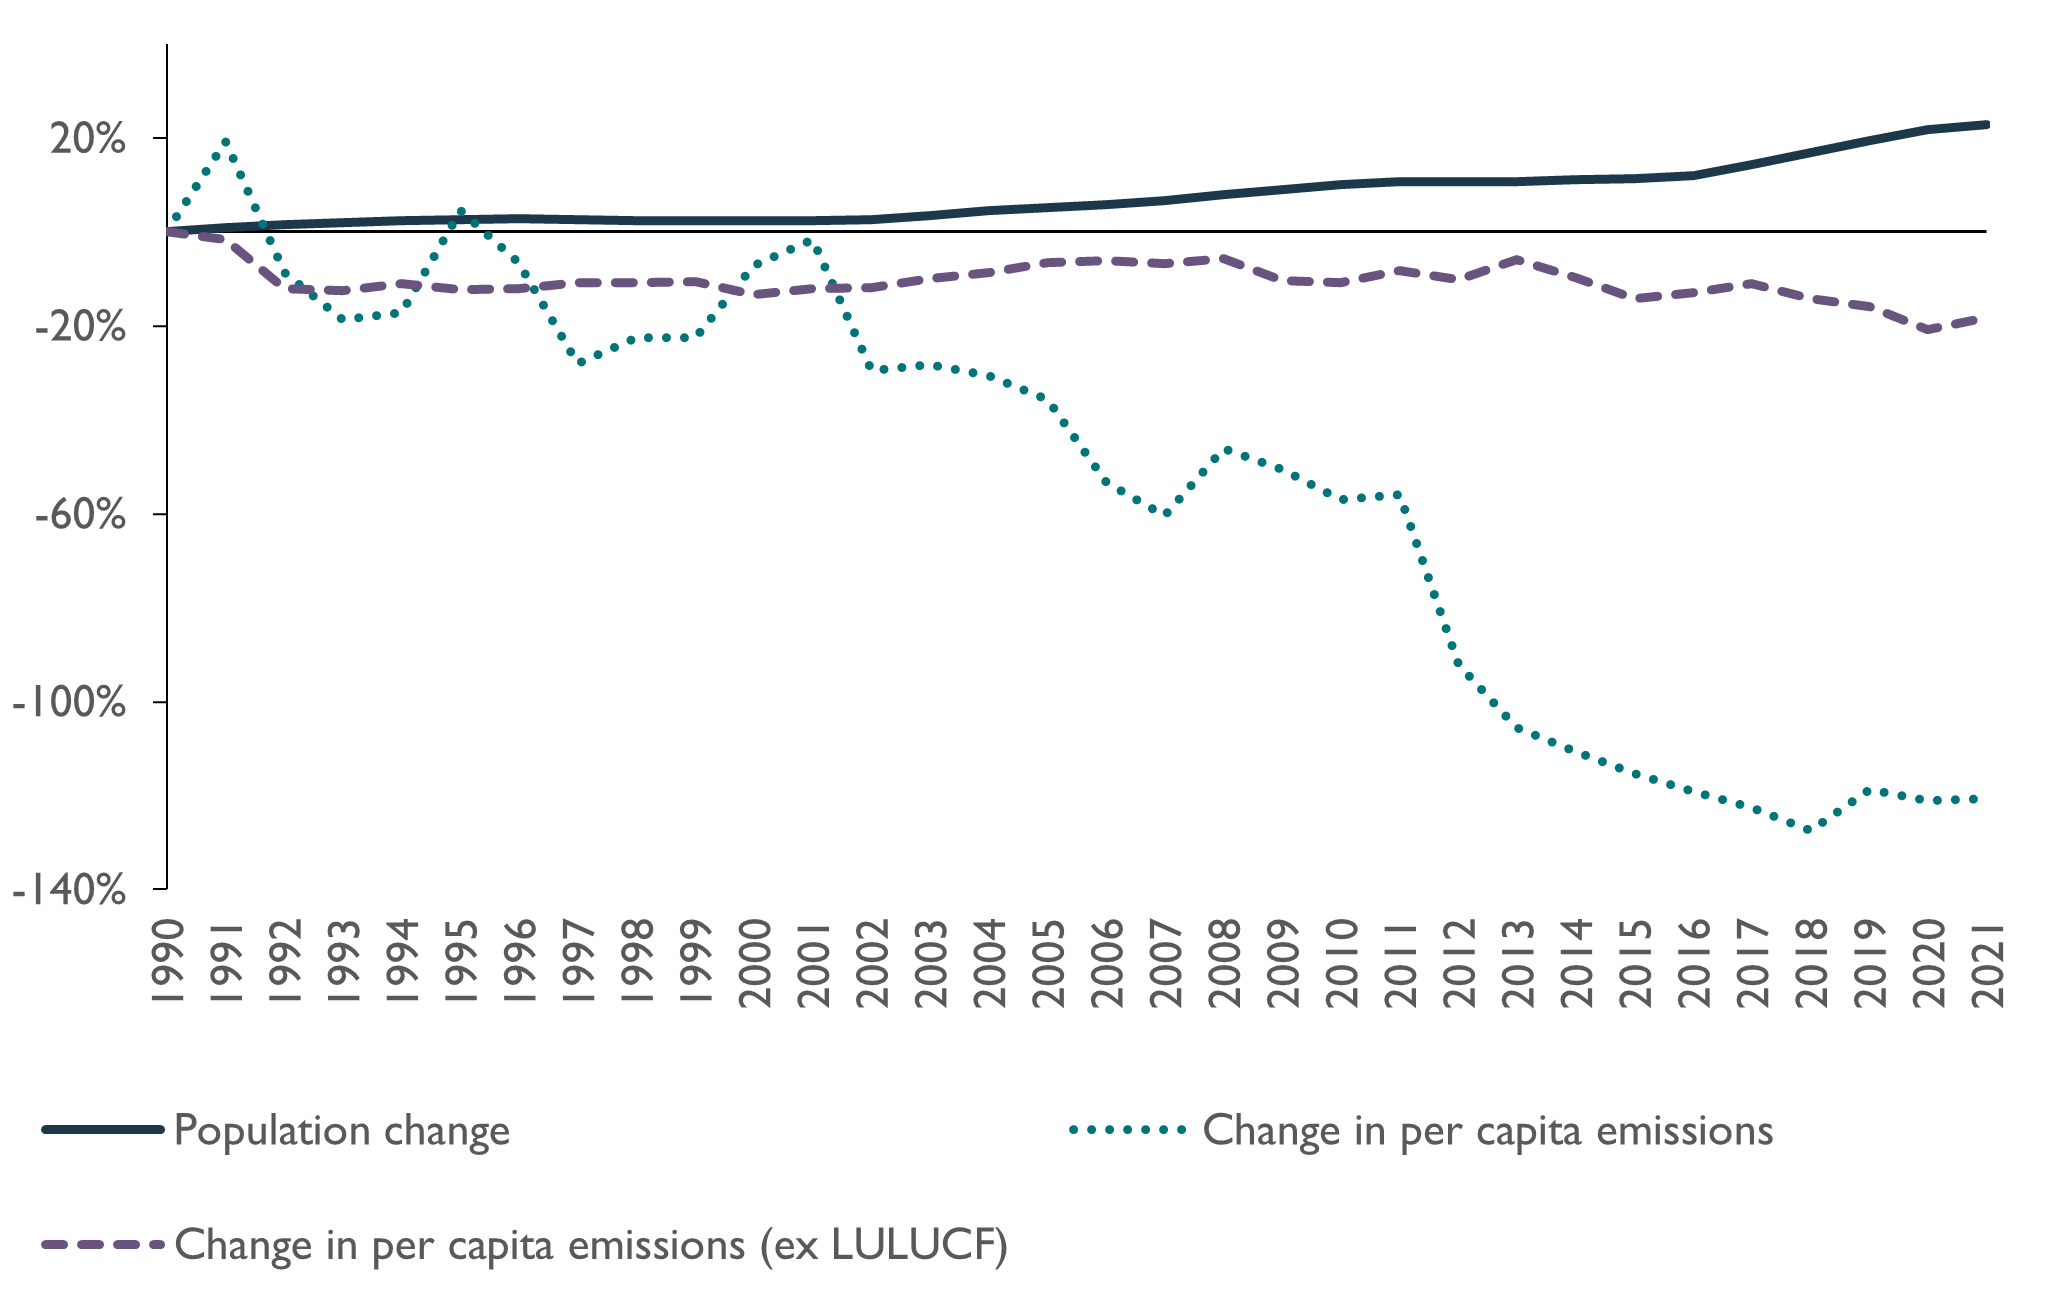 This figure is a line chart showing the percentage change in Tasmania's population and emissions per person, with and without the LULUCF sector, from 1990 to 2021. The solid line shows Tasmania's population has steadily grown, having increased by 22.9 per cent between 1990 and 2021. When emissions from the LULUCF sector are included, the change in emissions per person shows some fluctuations but a general downwards trend to a decline of 120.7 per cent in 2021. When emissions from the LULUCF sector are excluded, the percentage change in Tasmania's emissions per person declines marginally. In 2021, the graph shows a decrease in emissions of 18.3 per cent per person (excluding LULUCF) relative to the 1990 baseline. 